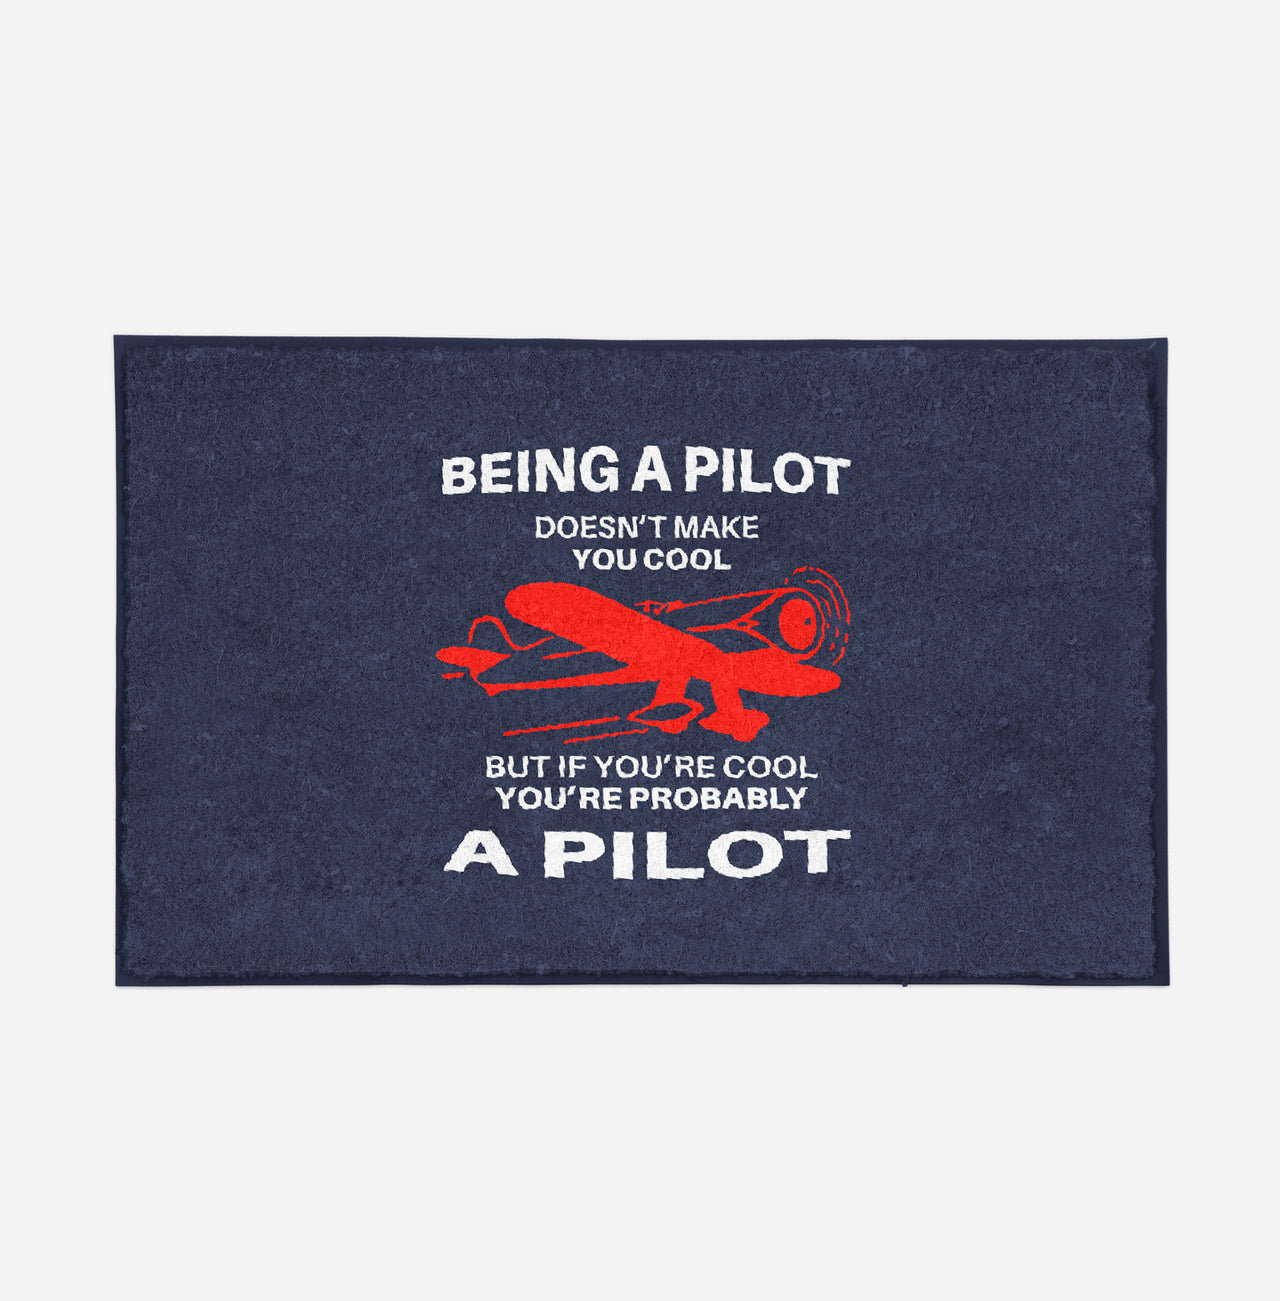 If You're Cool You're Probably a Pilot Designed Door Mats